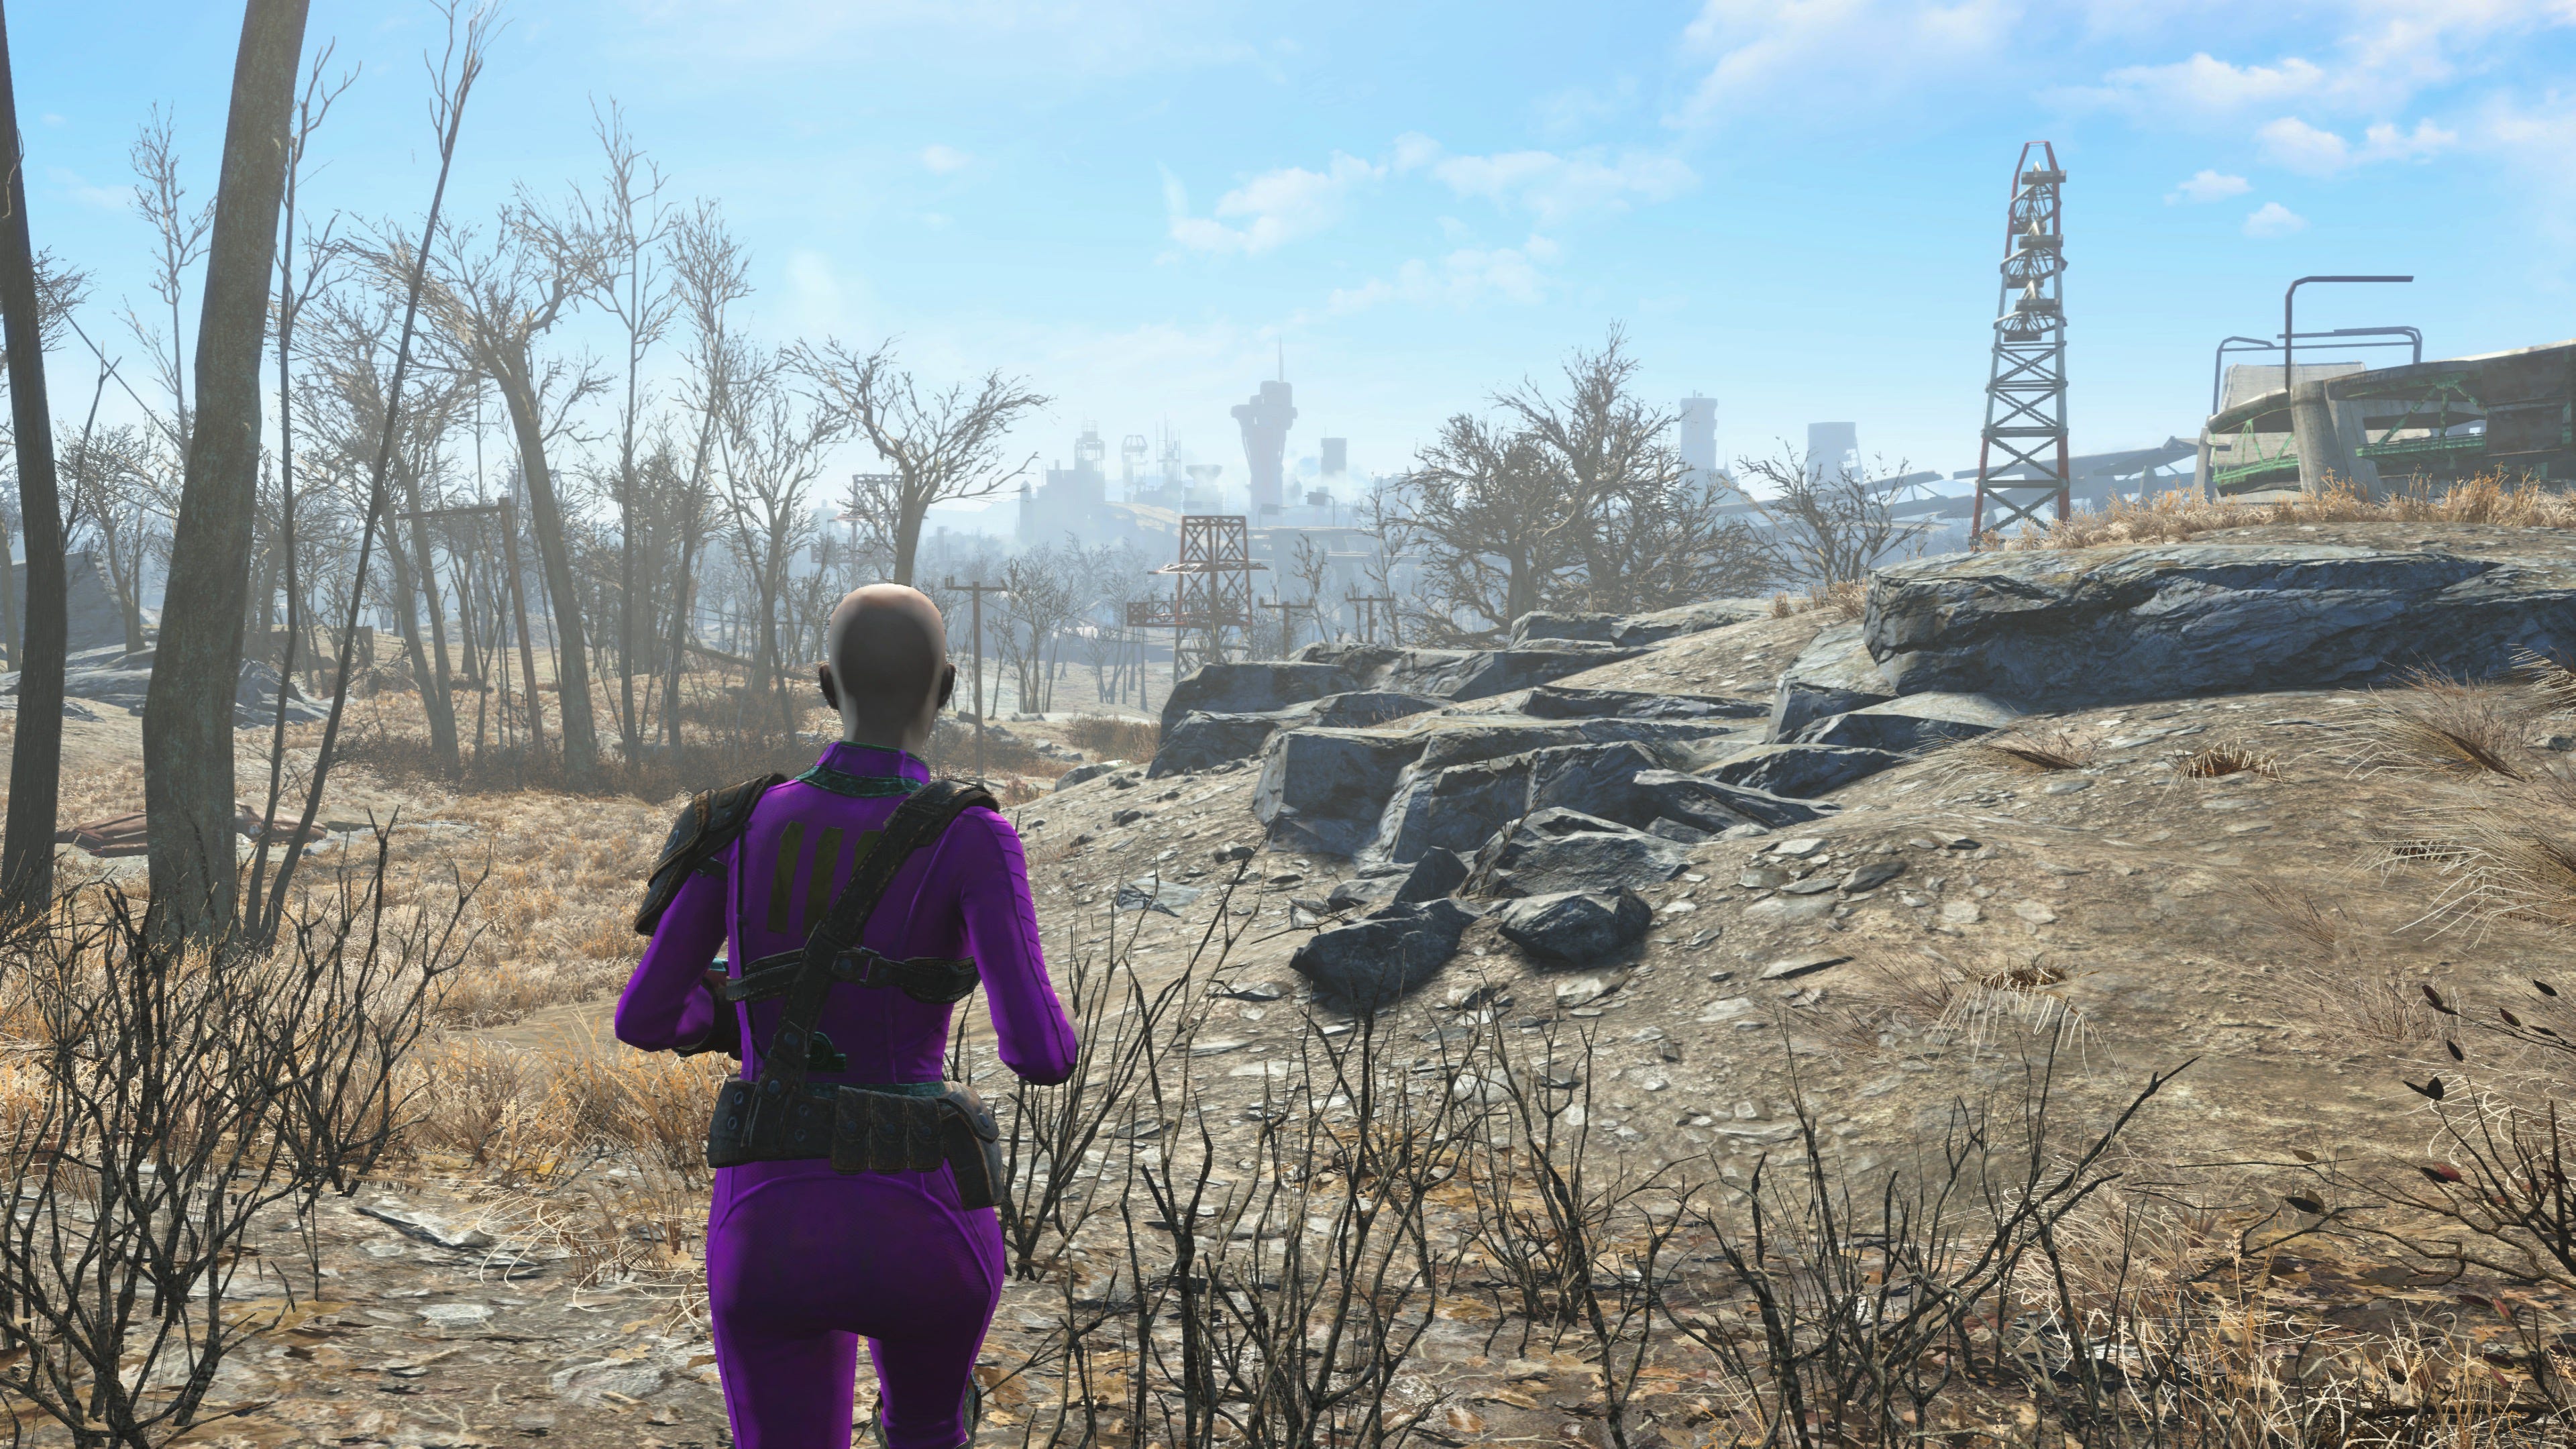 Susan’s Fallout 4 character running in a barren wasteland.